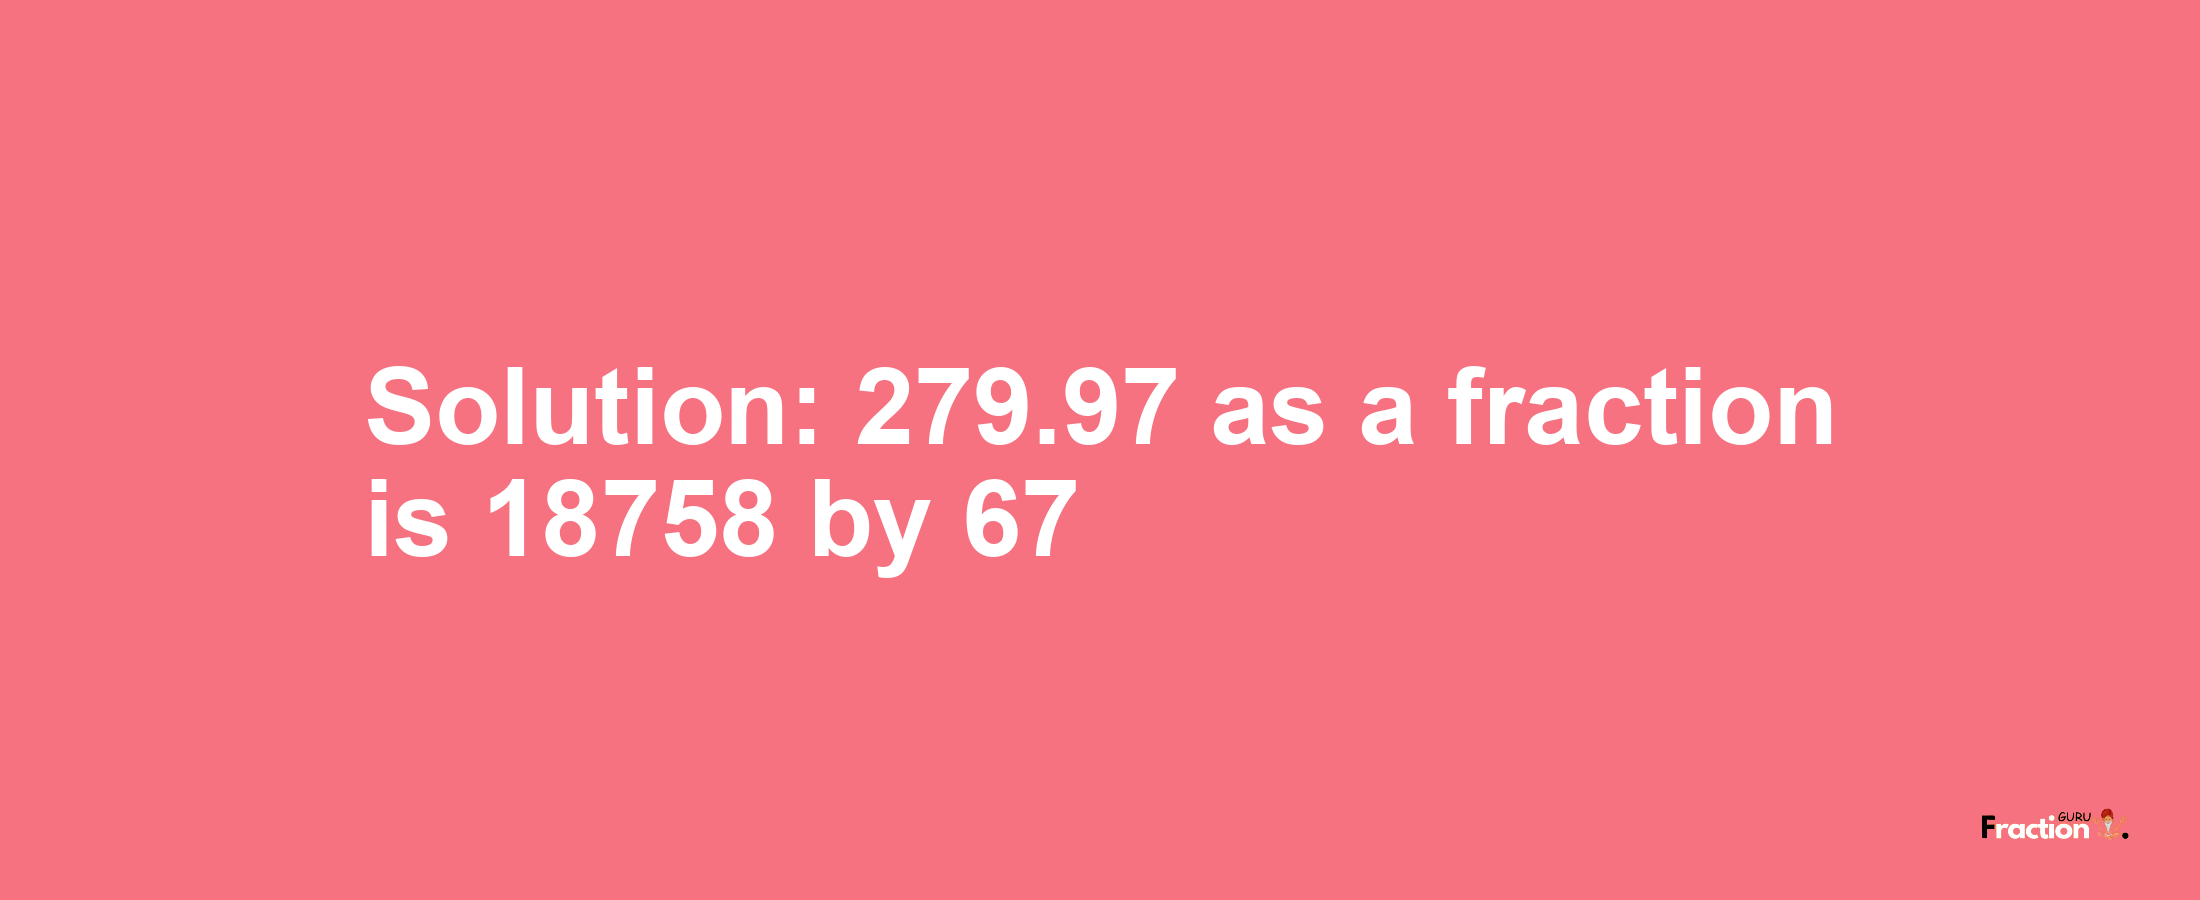 Solution:279.97 as a fraction is 18758/67